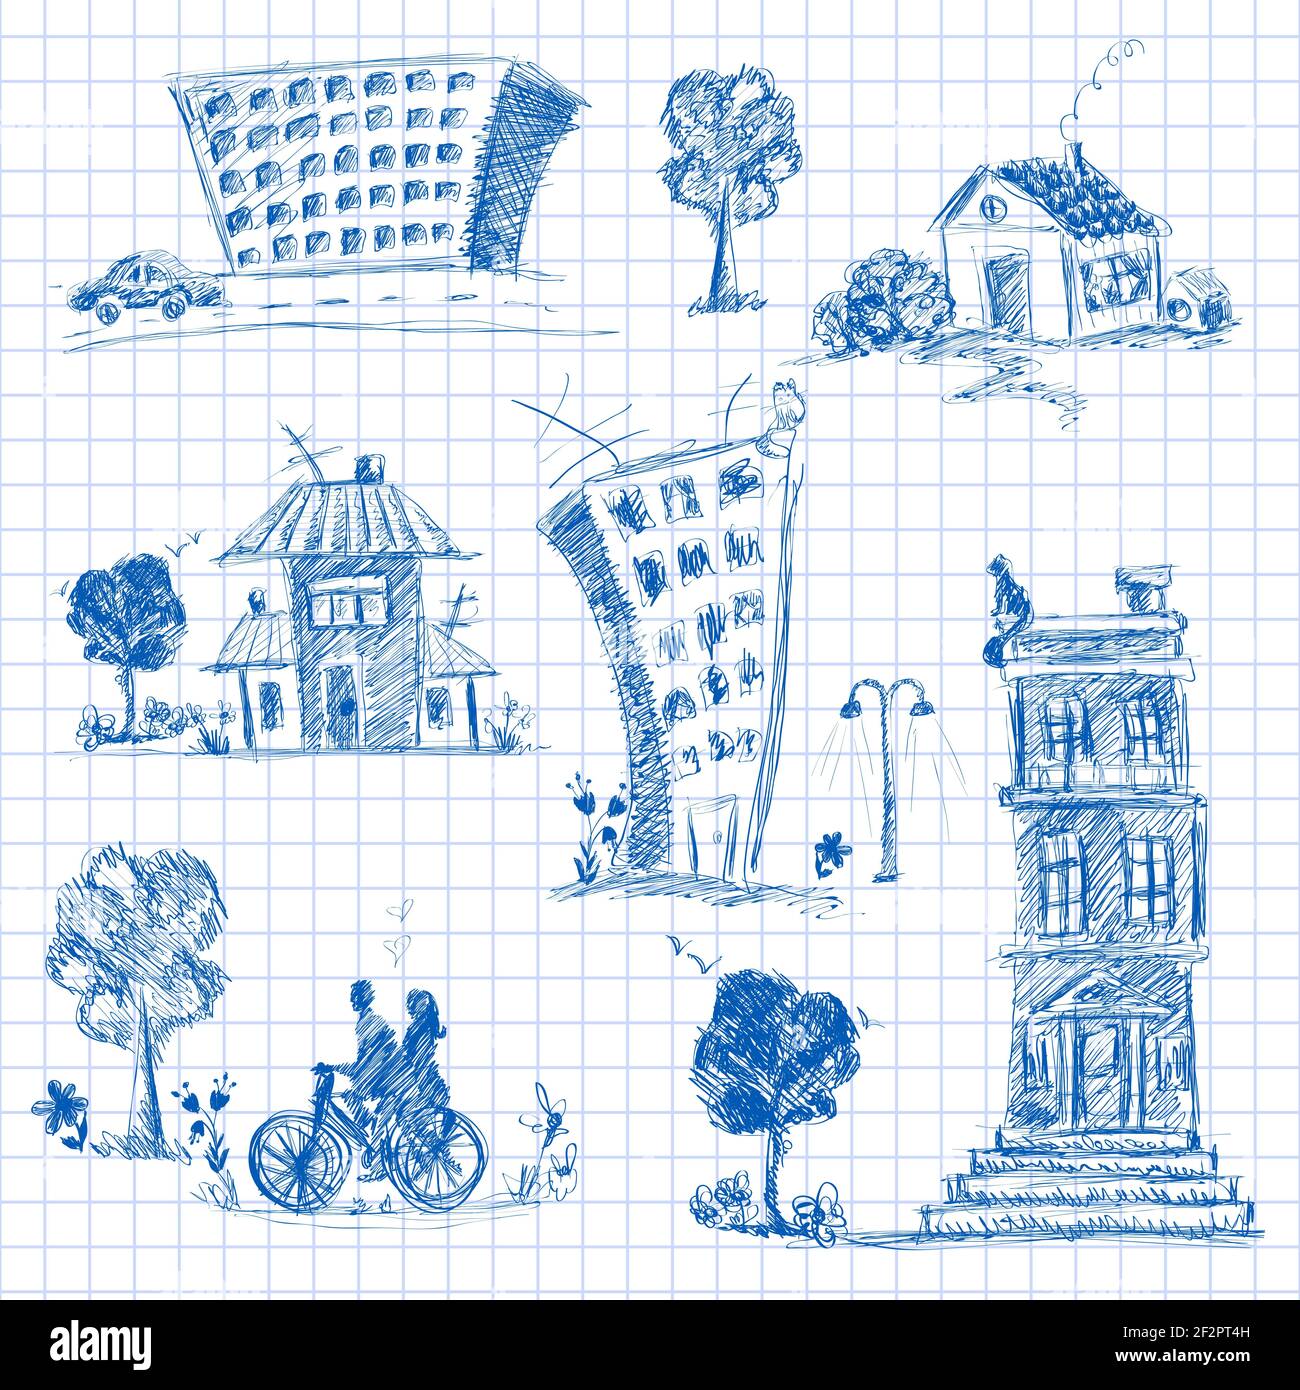 City doodle set of urban buildings on squared paper background isolated vector illustration. Stock Vector